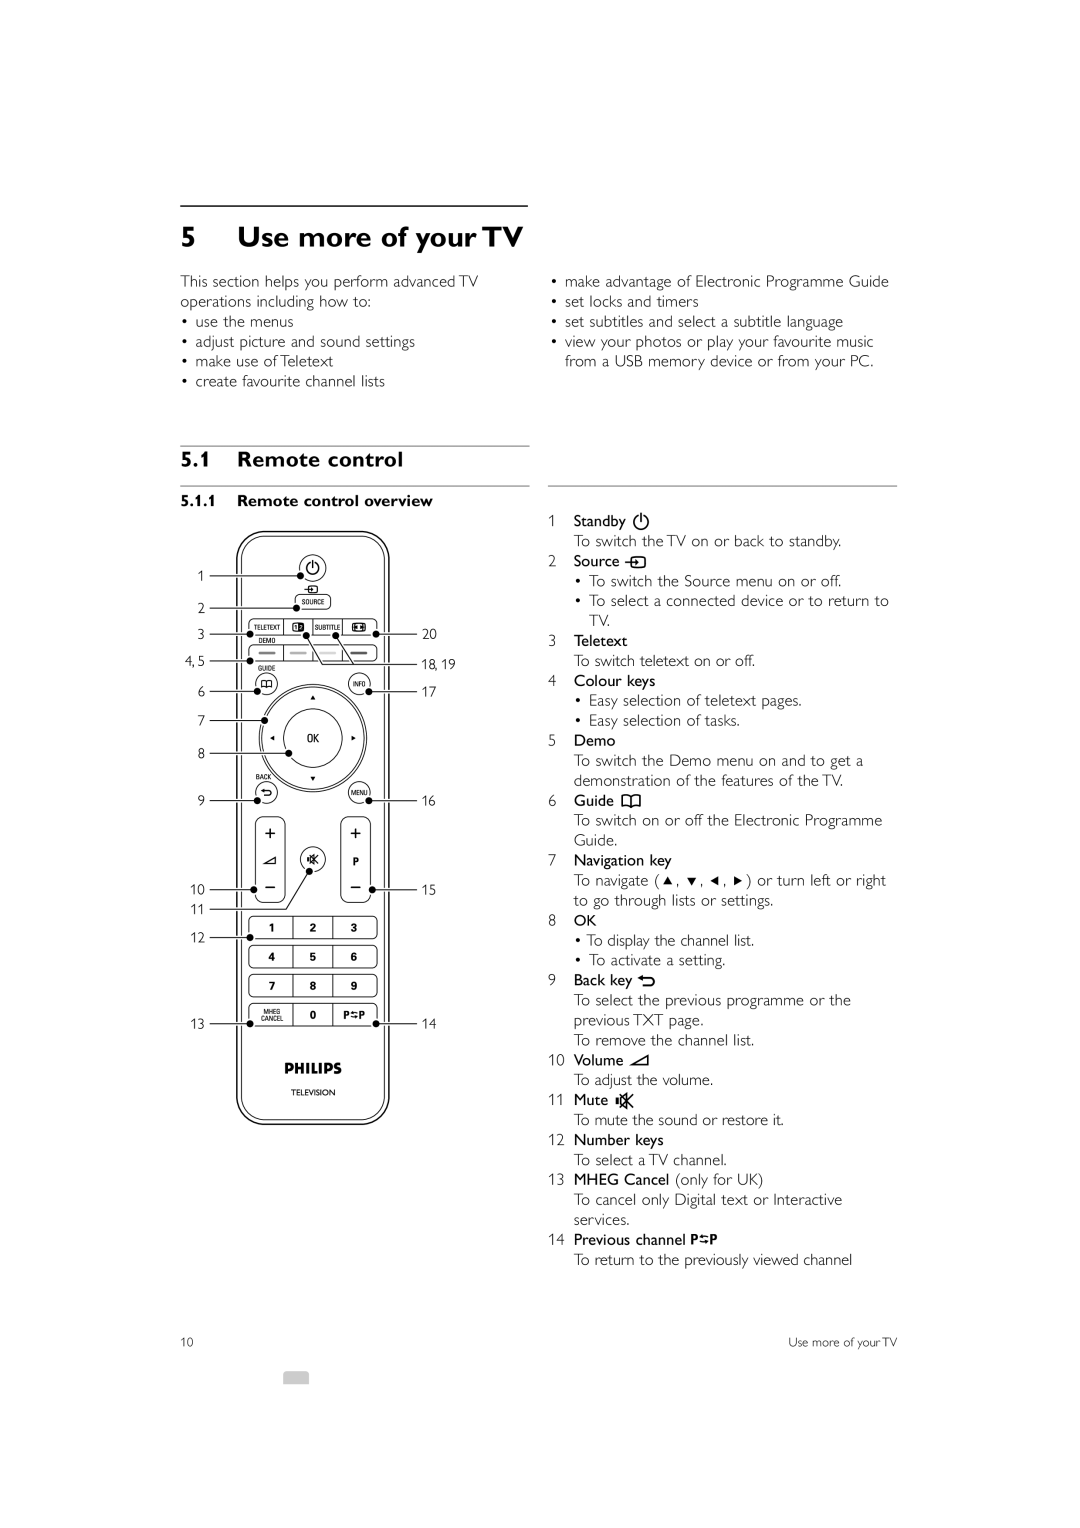 Philips 37PFL7403 manual Use more of your TV, Remote control overview 